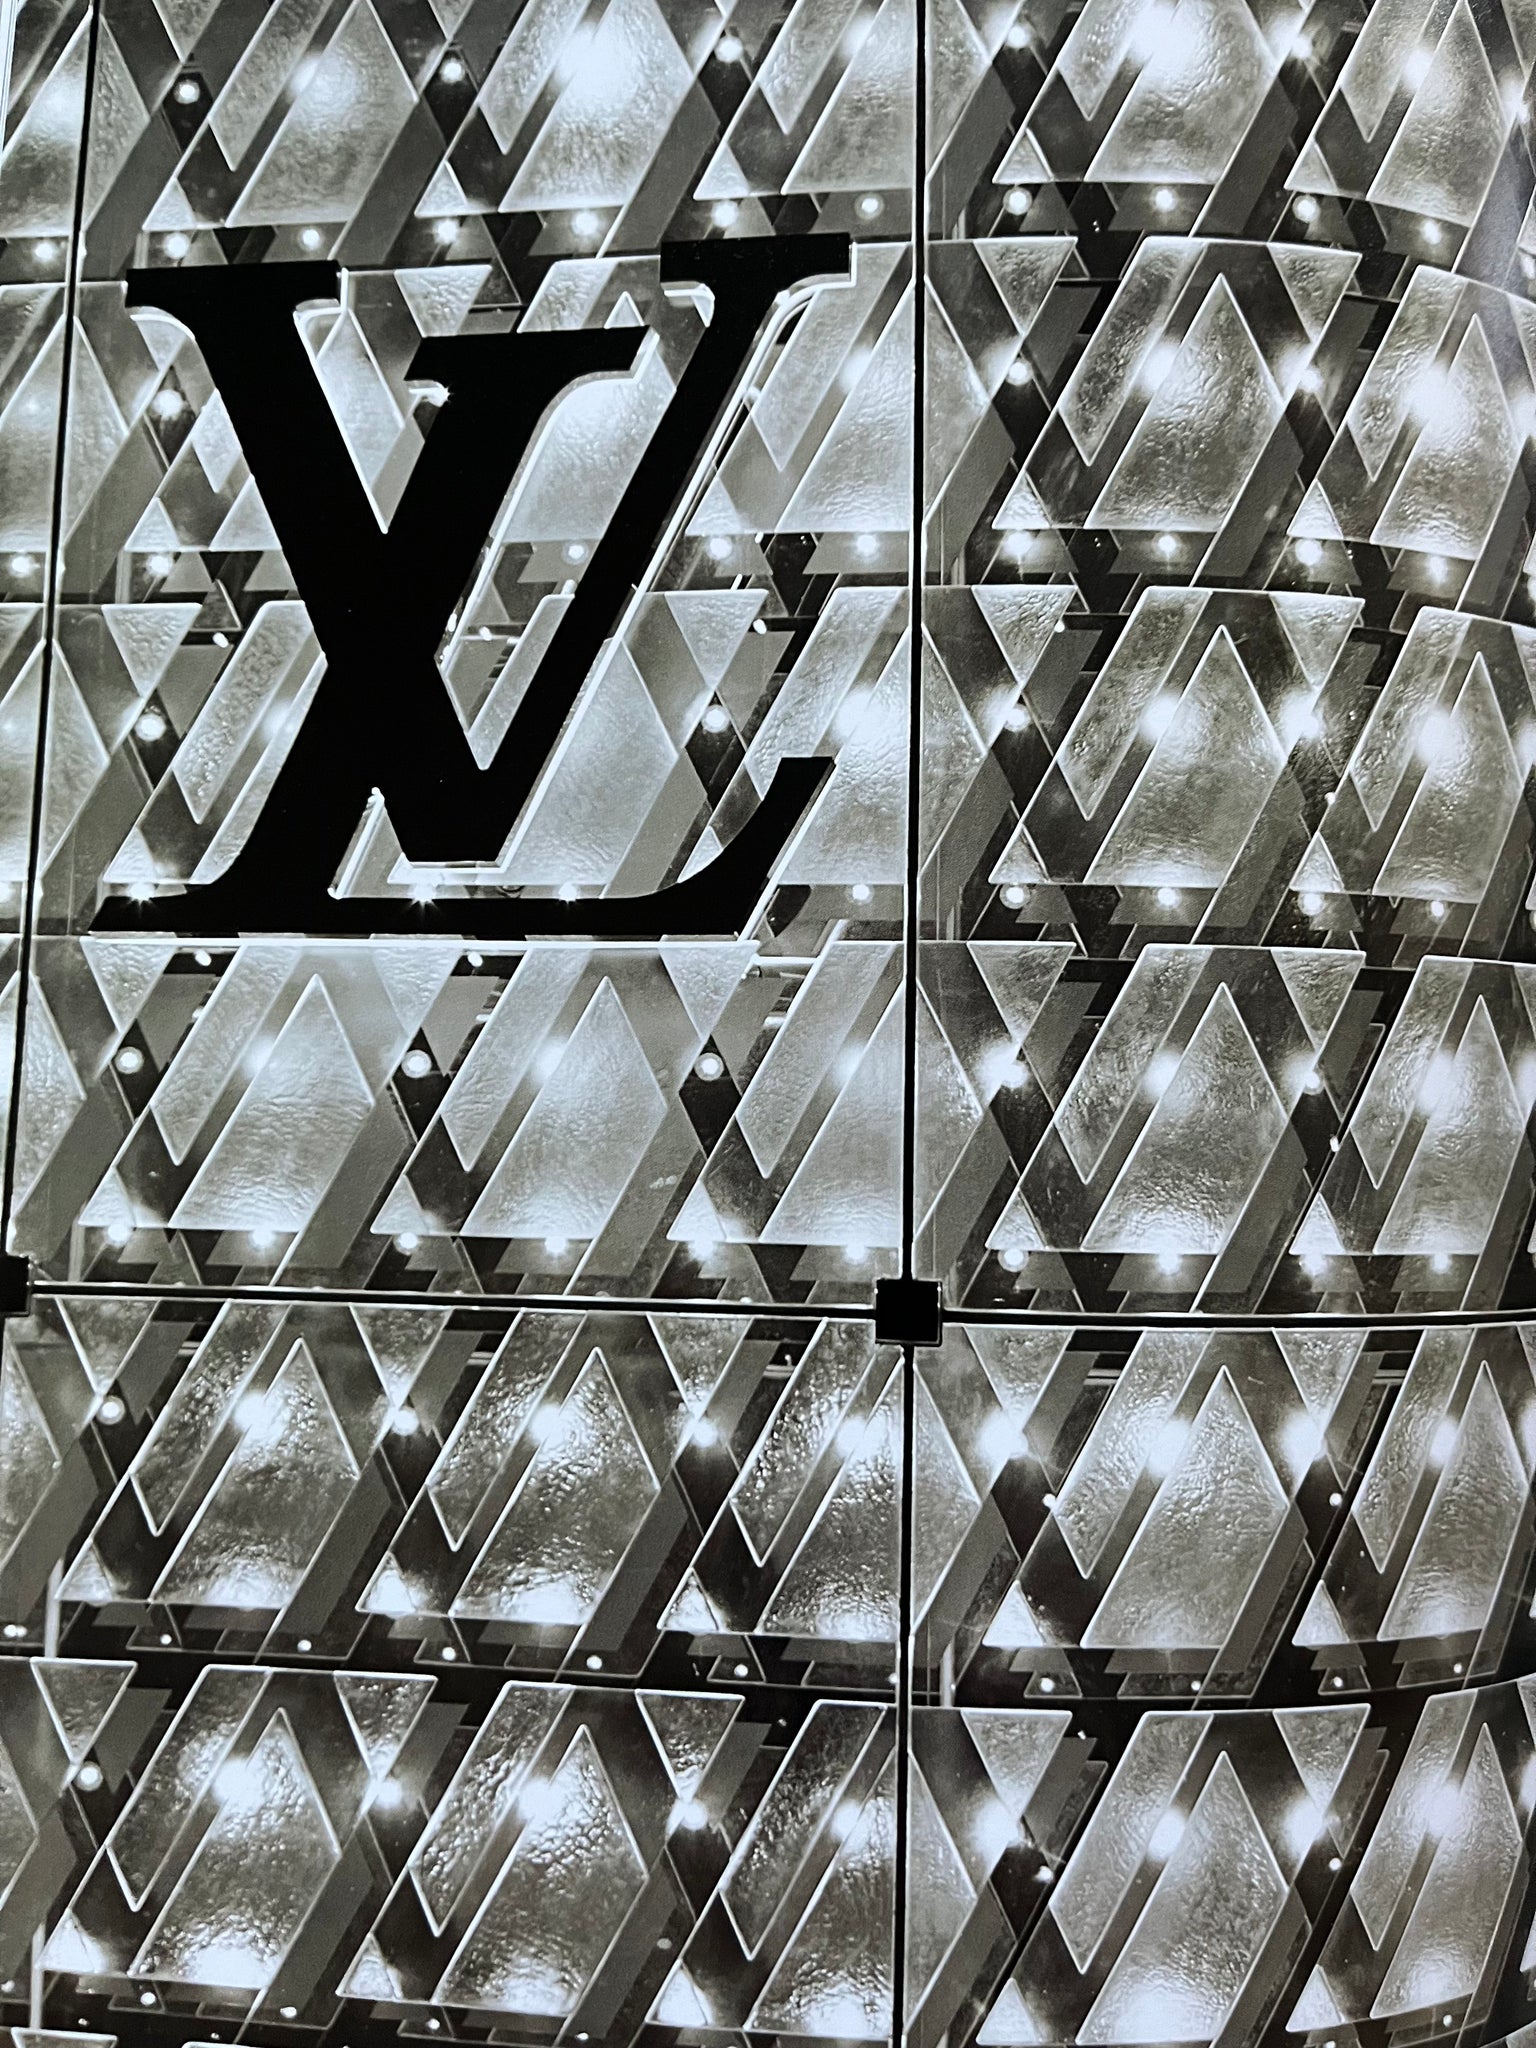 Louis Vuitton: Architecture and Interiors